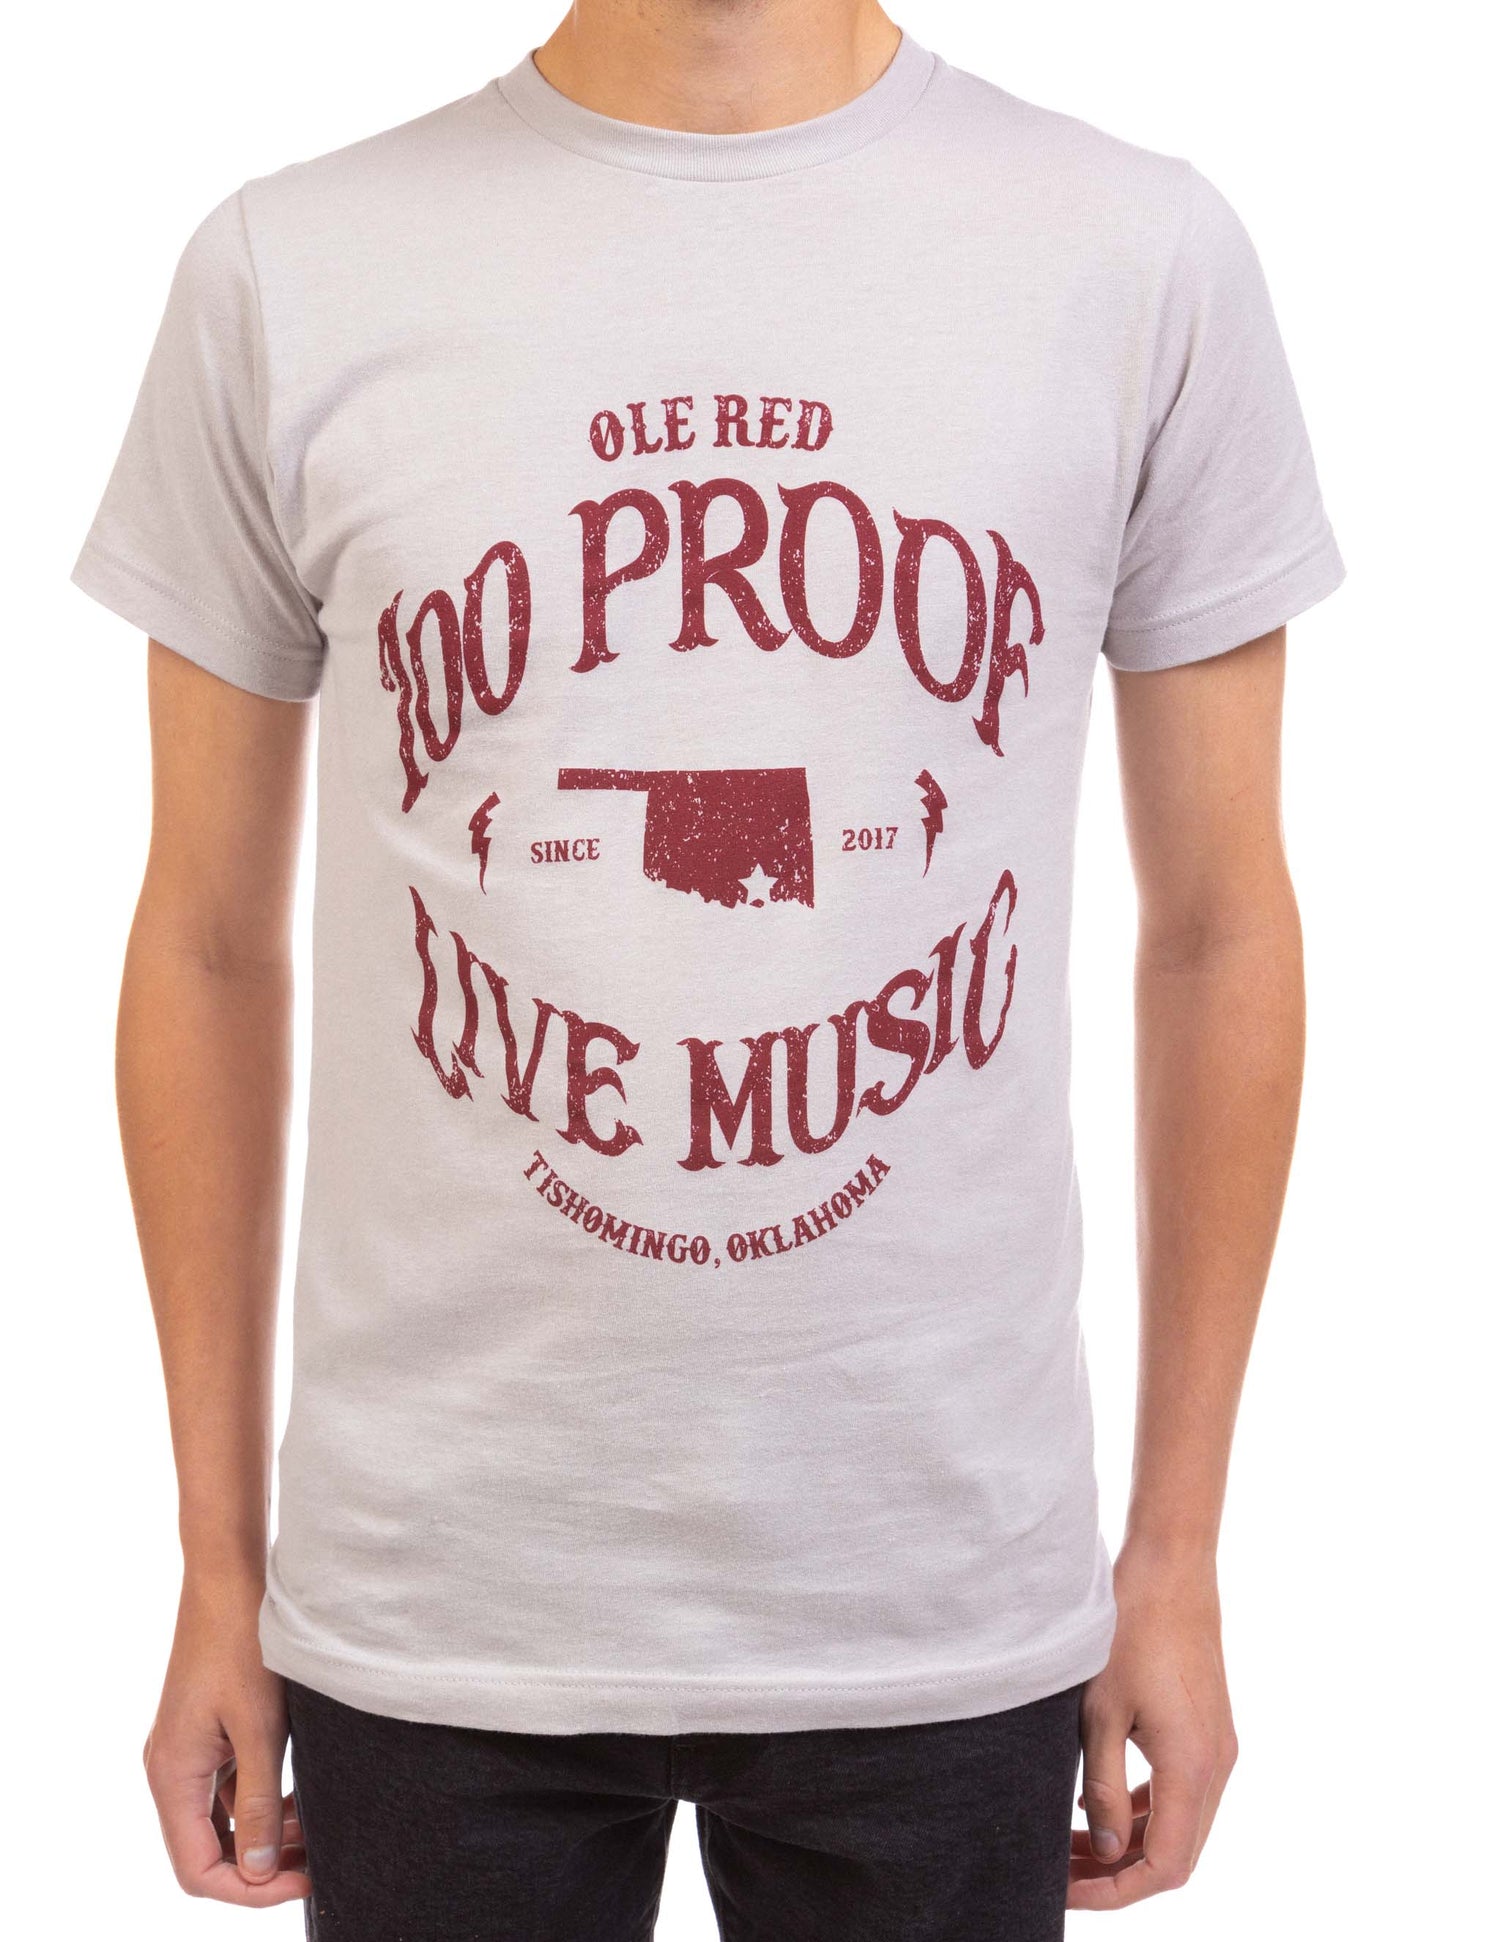 Ole Red 100 Proof T-Shirt